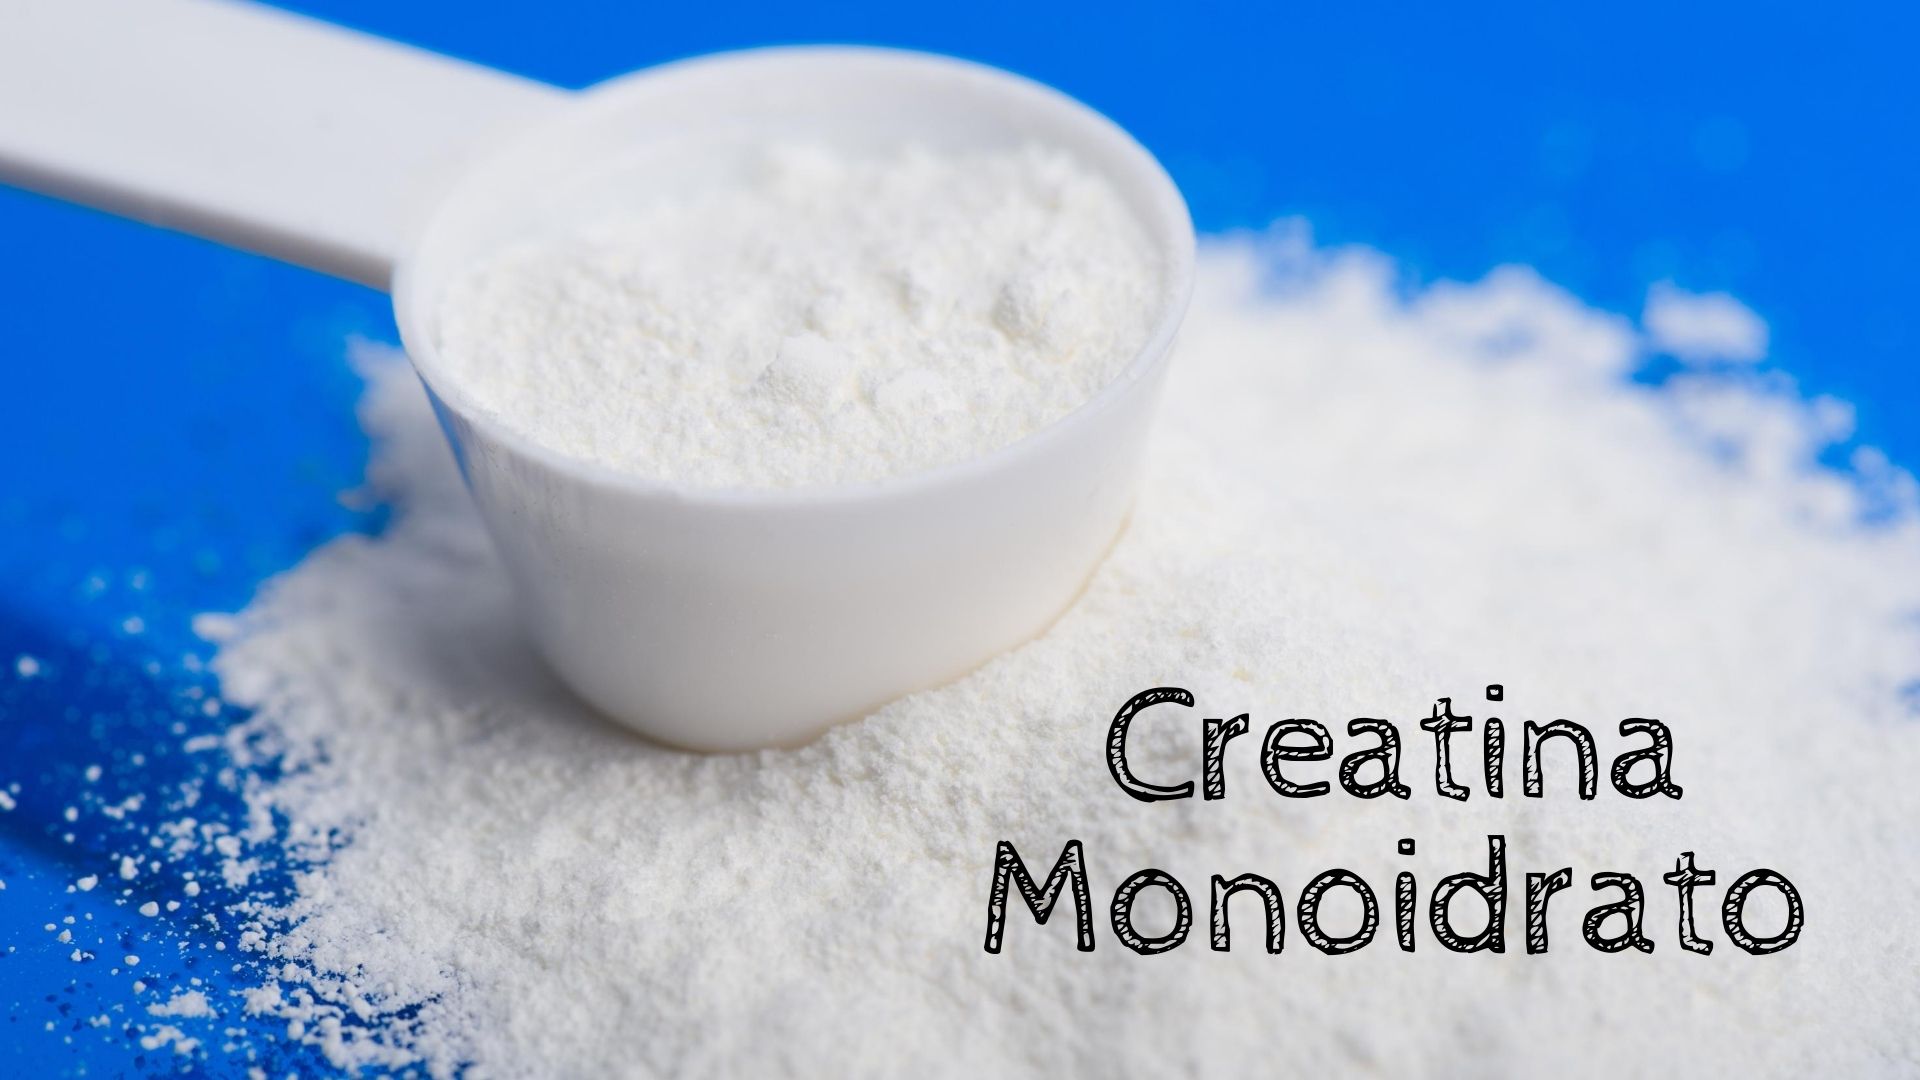 Creatine and All the Positive Effects on Endurance Sports